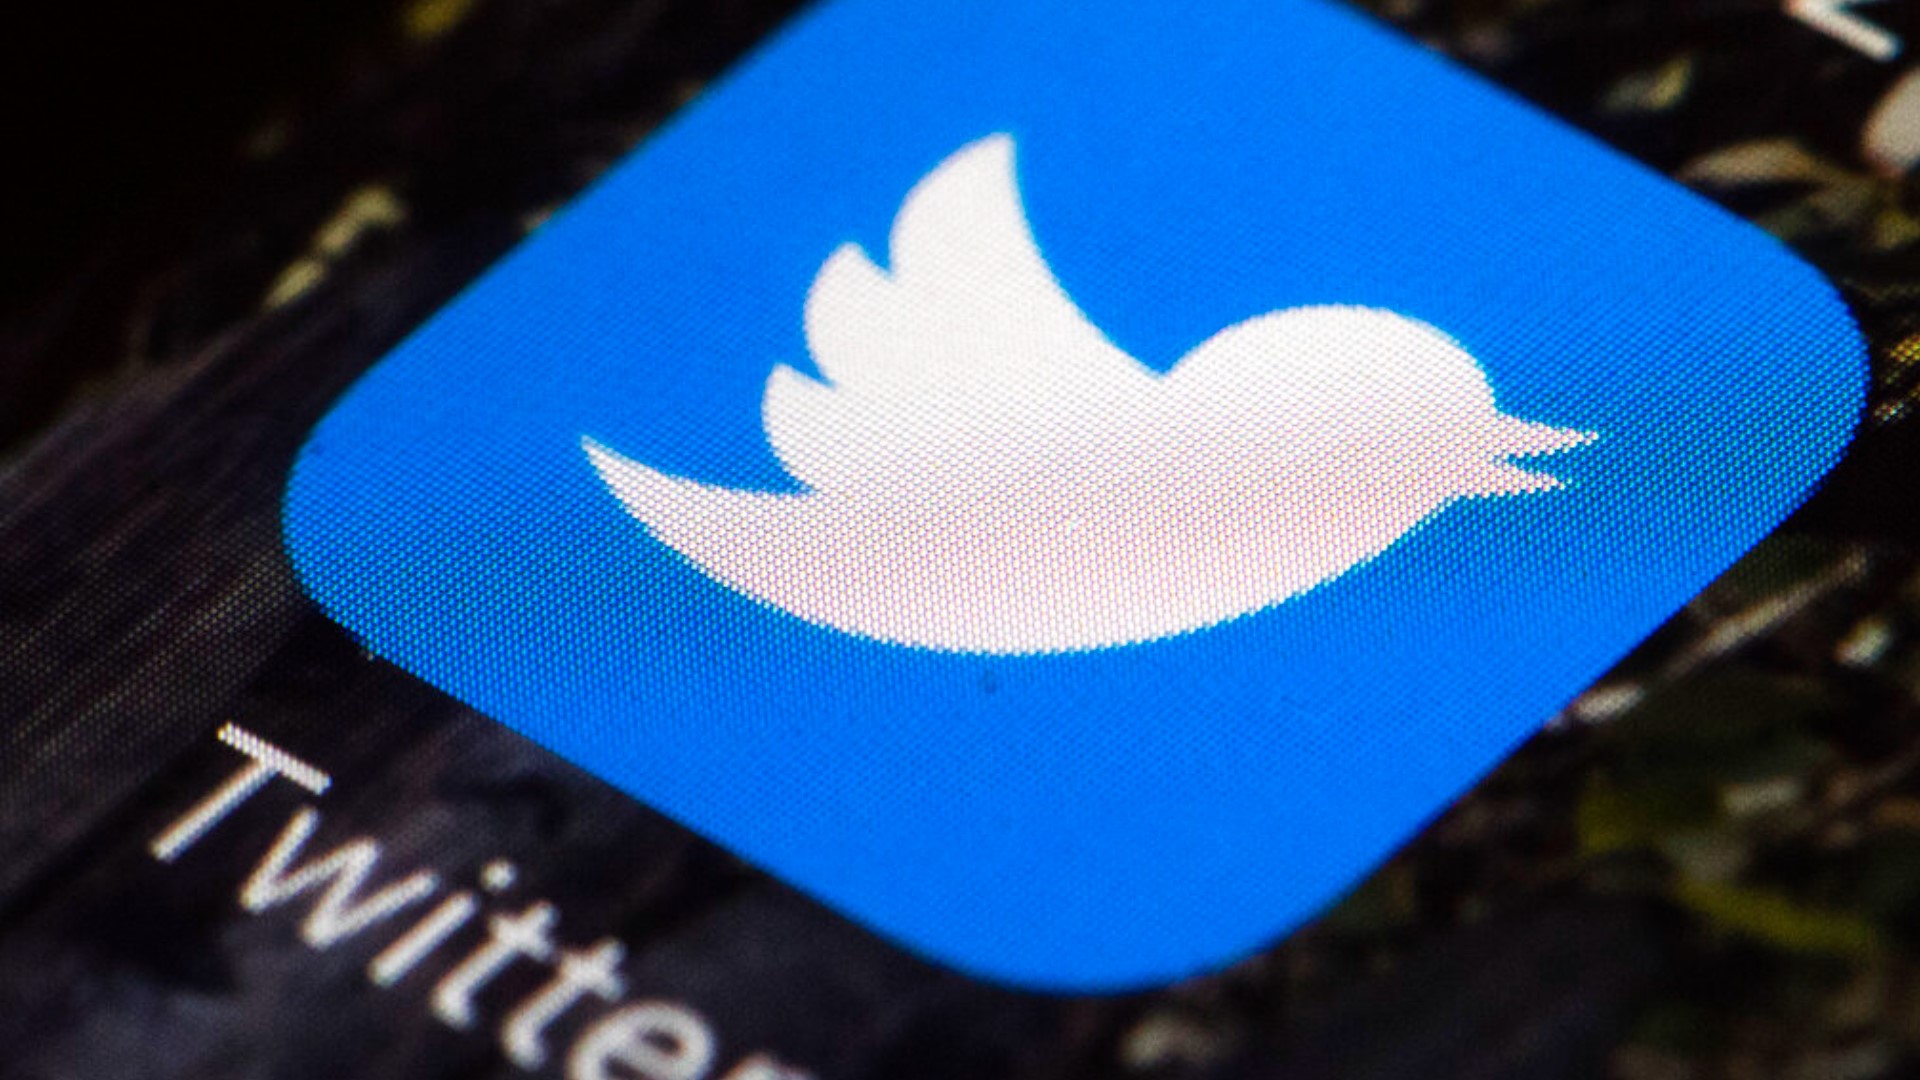 One of Twitter’s most requested features could soon be a reality.